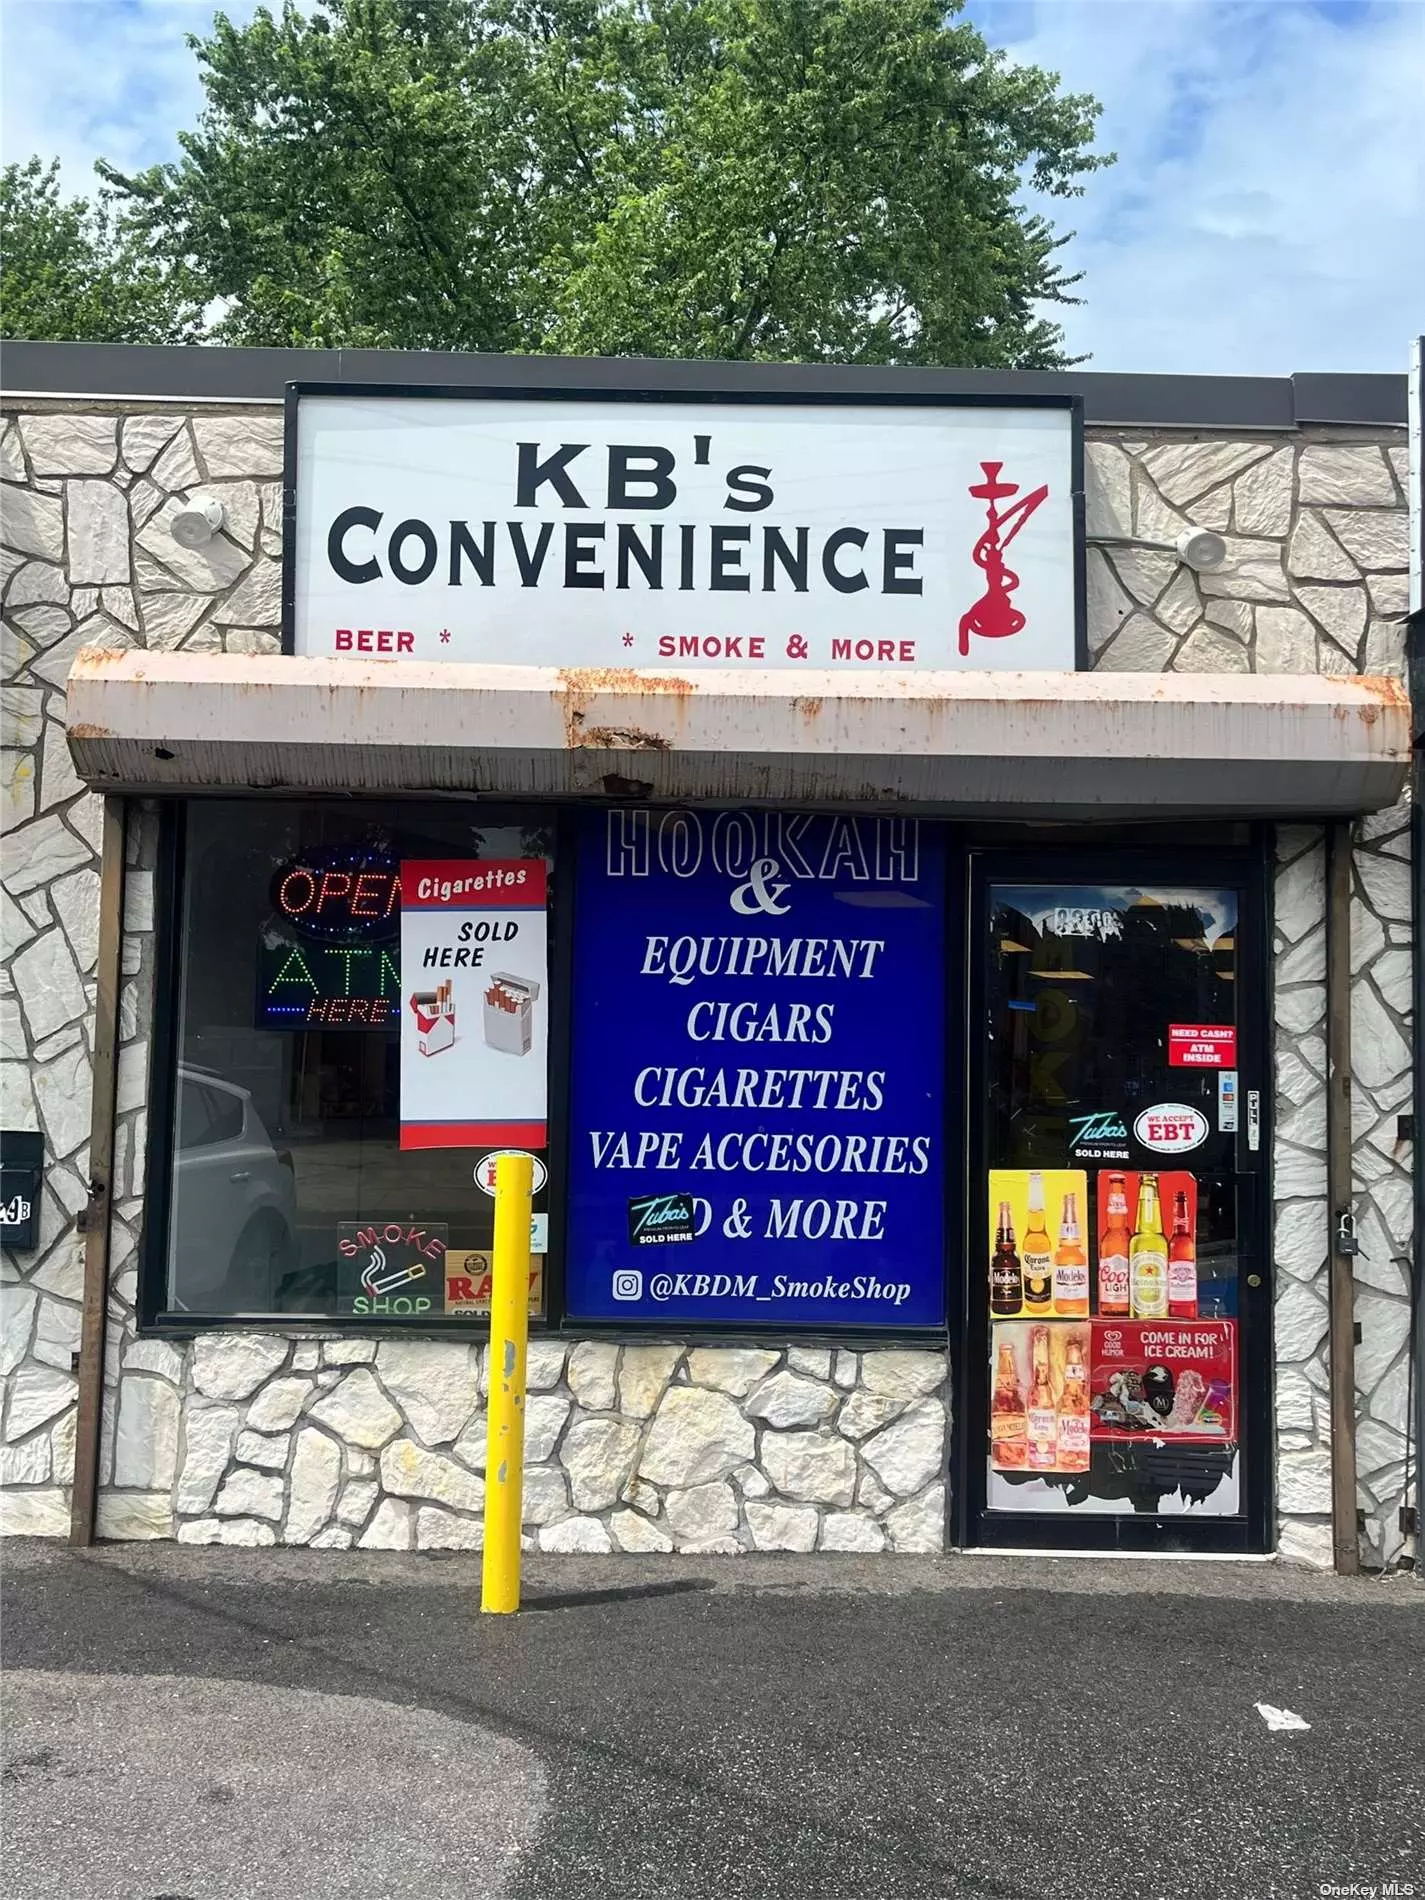 Great opportunity to own a long-established, Smoke Shop licensed to sell beer, tobacco, cigars and variety of products. in Deer Park NY!